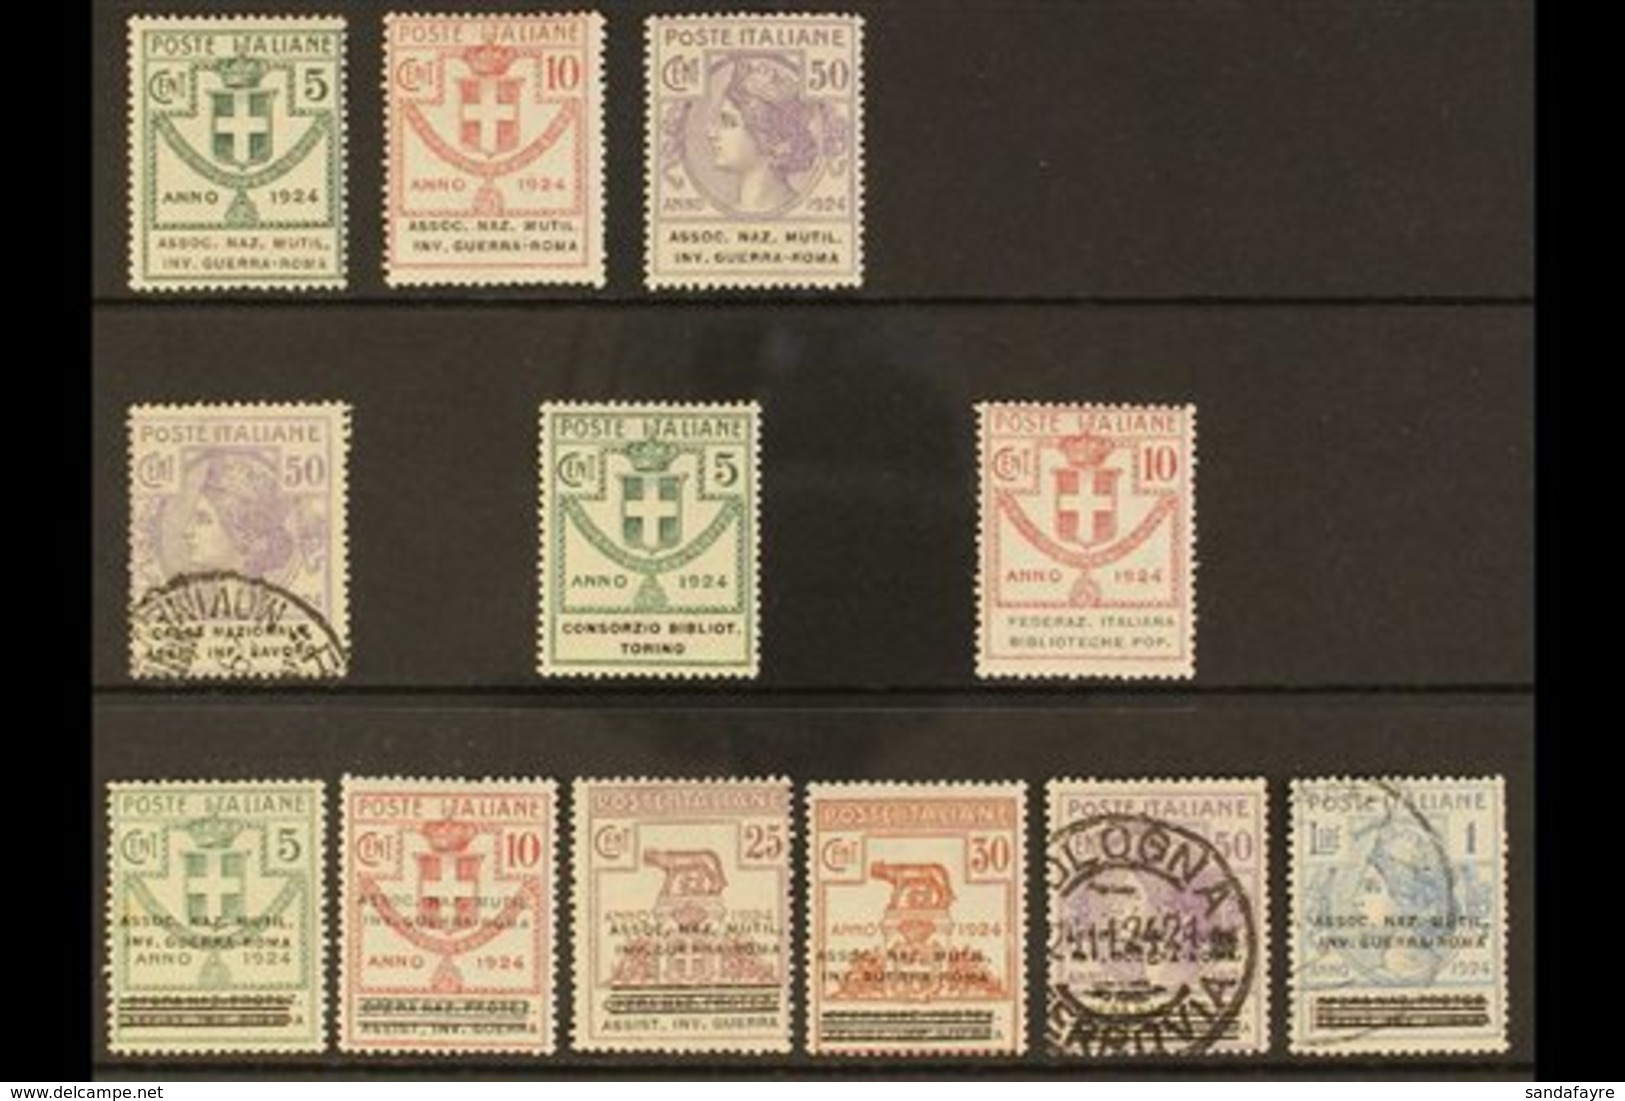 FRANCHISE STAMPS 1924 Mint & Used All Different Group On A Stock Card, Includes Assoc. Naz. Mutil. Inv. Guerra - Roma, C - Non Classés